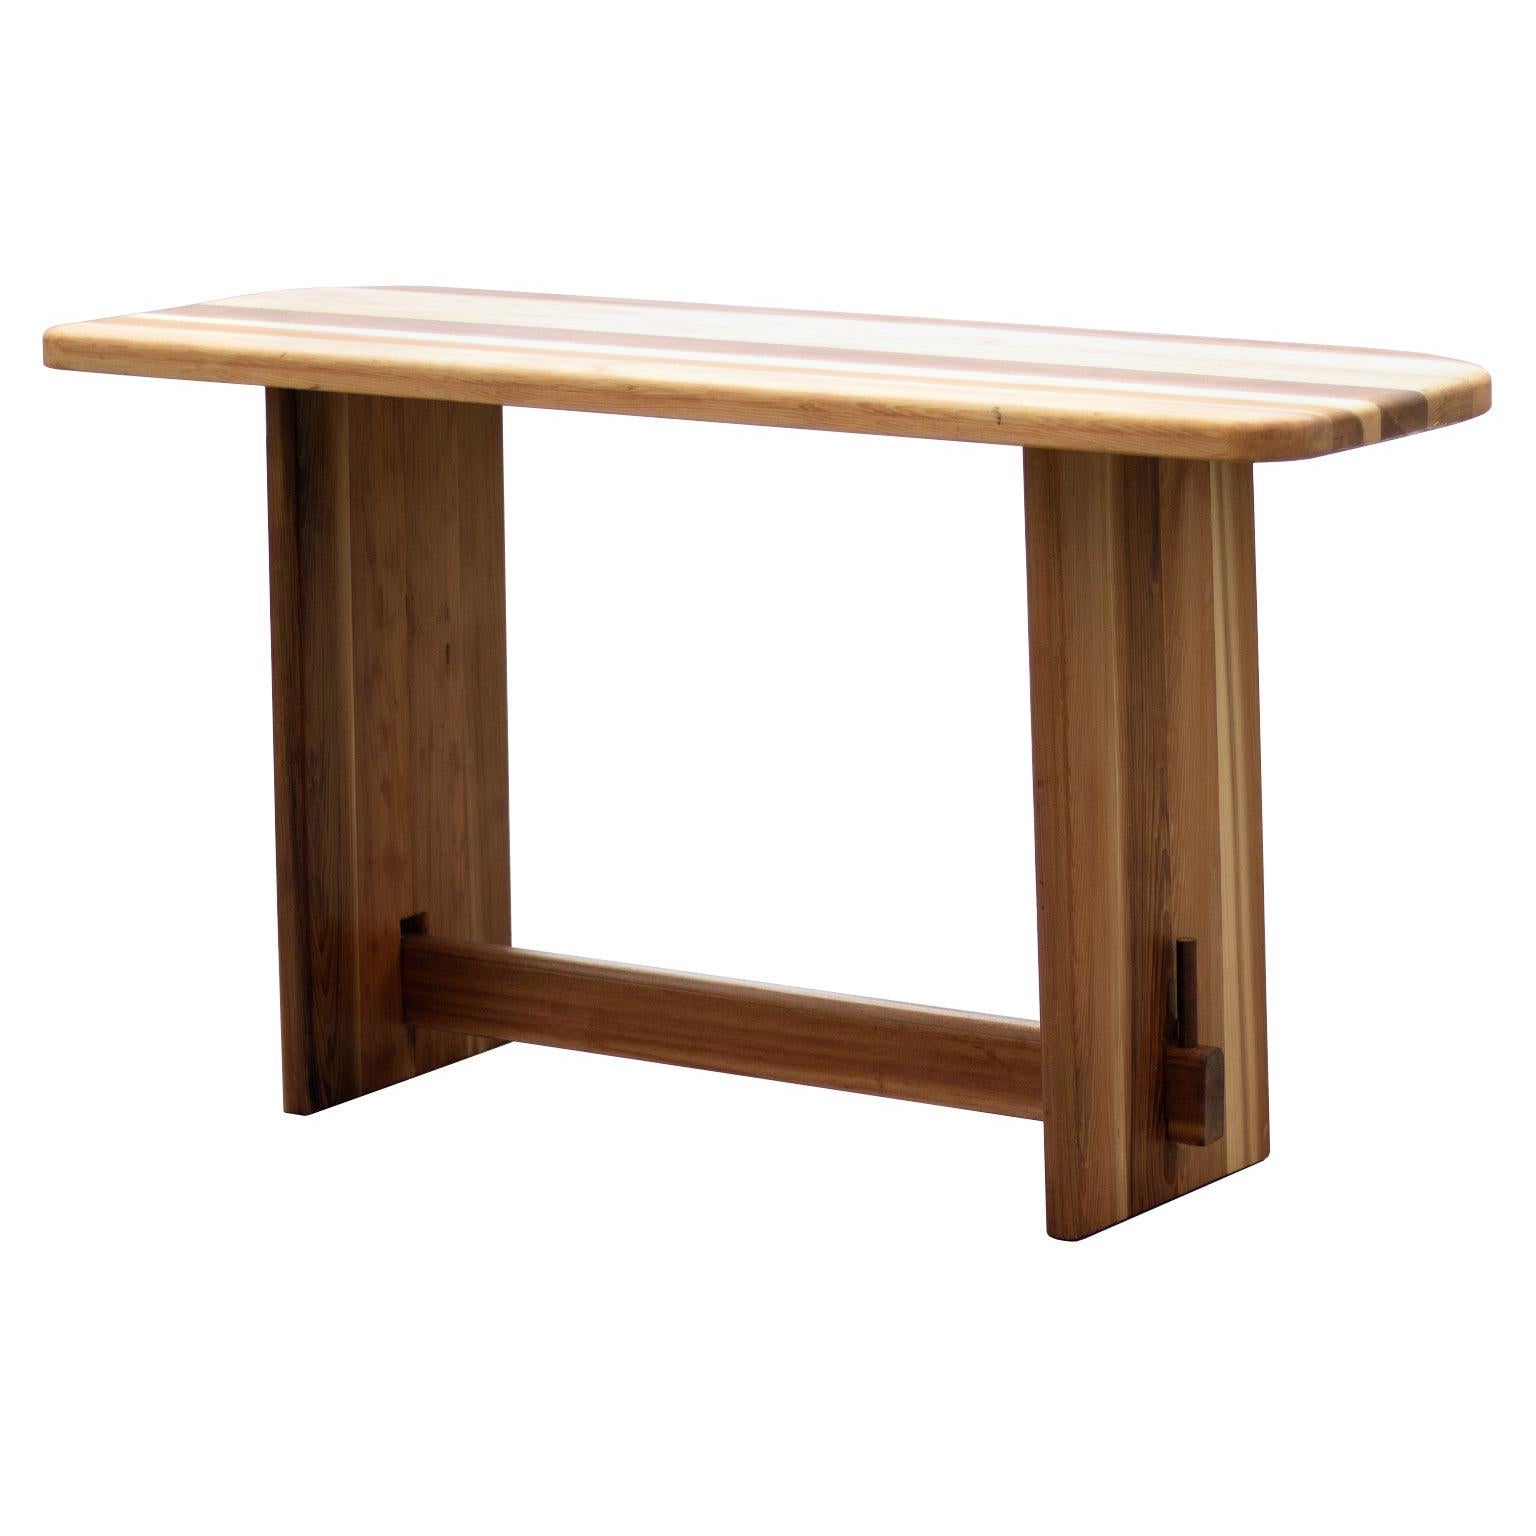 Imperial Cedar Outdoor Dining Table For Sale